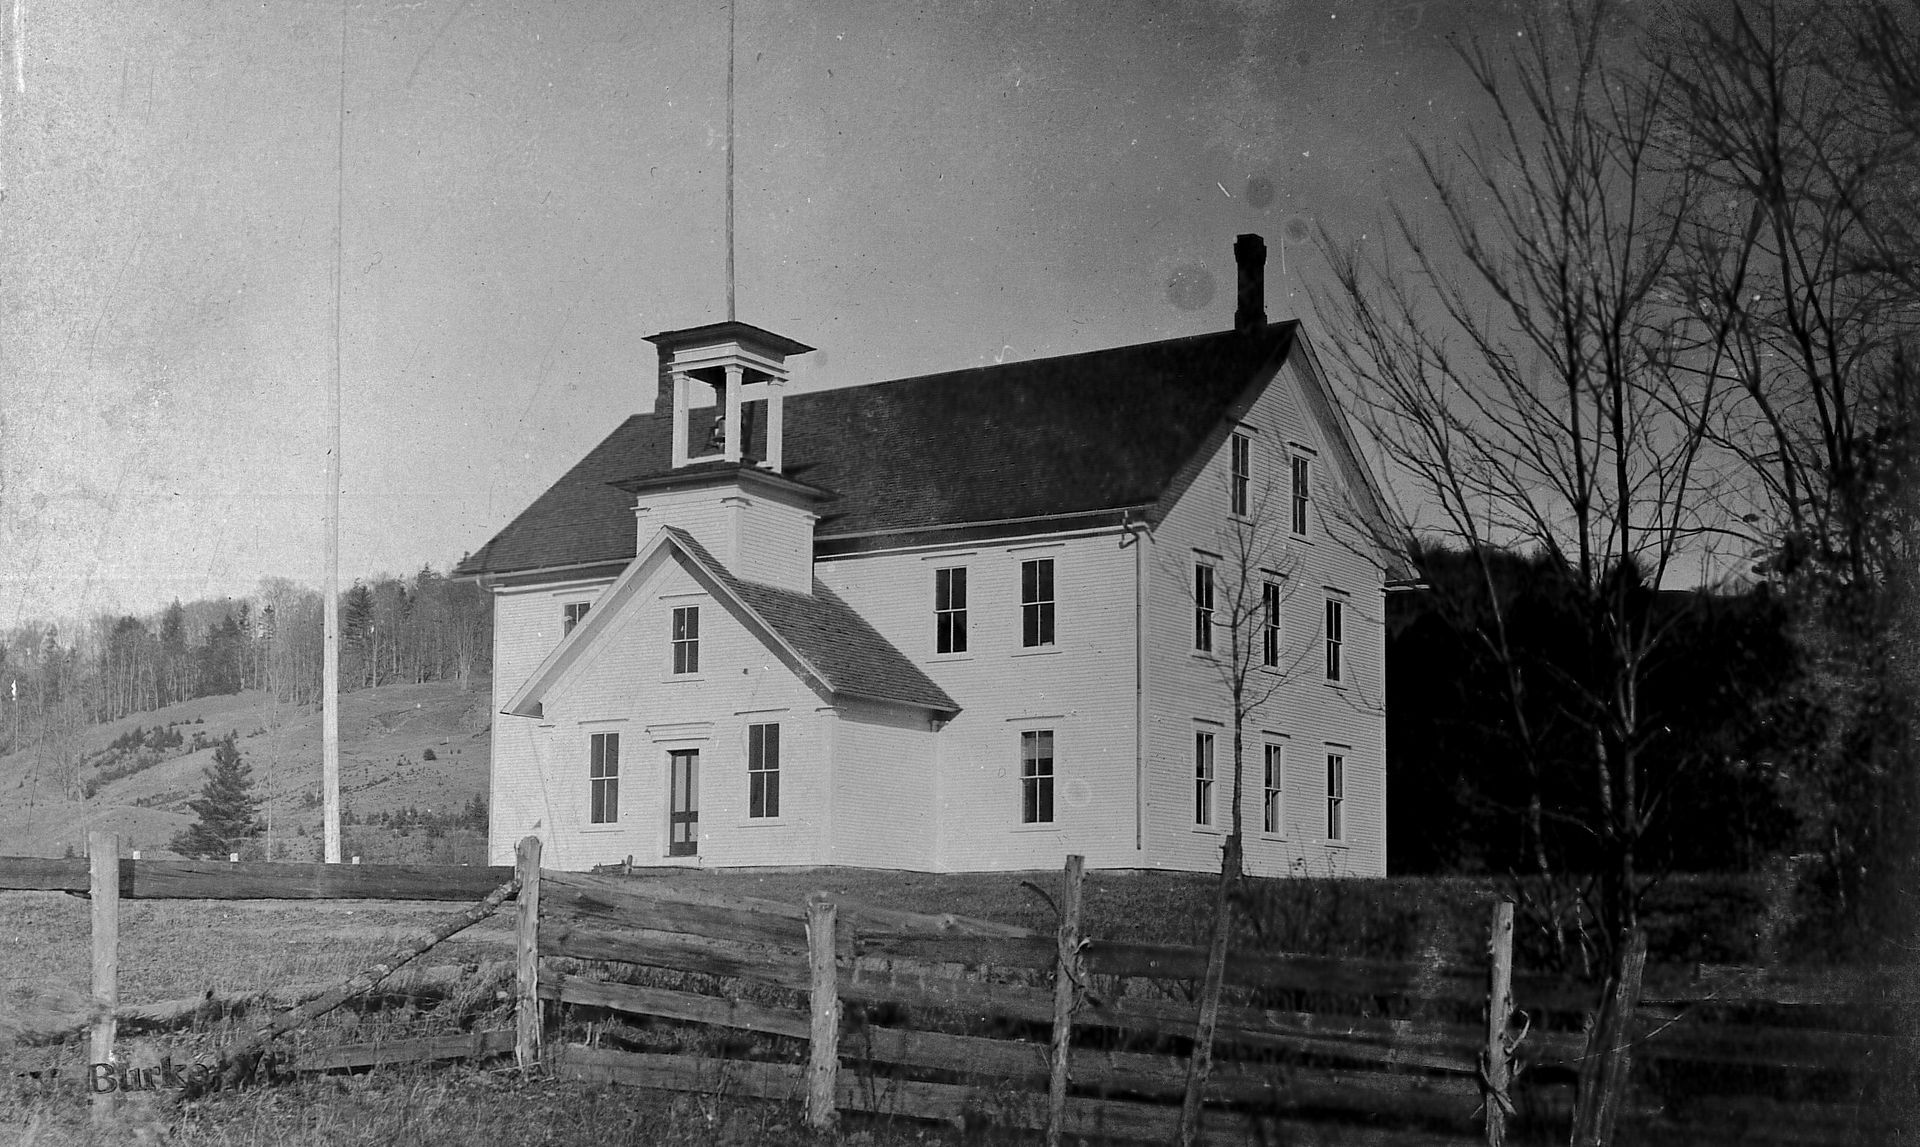 The Old School in West Burke, Vermont circa 1906